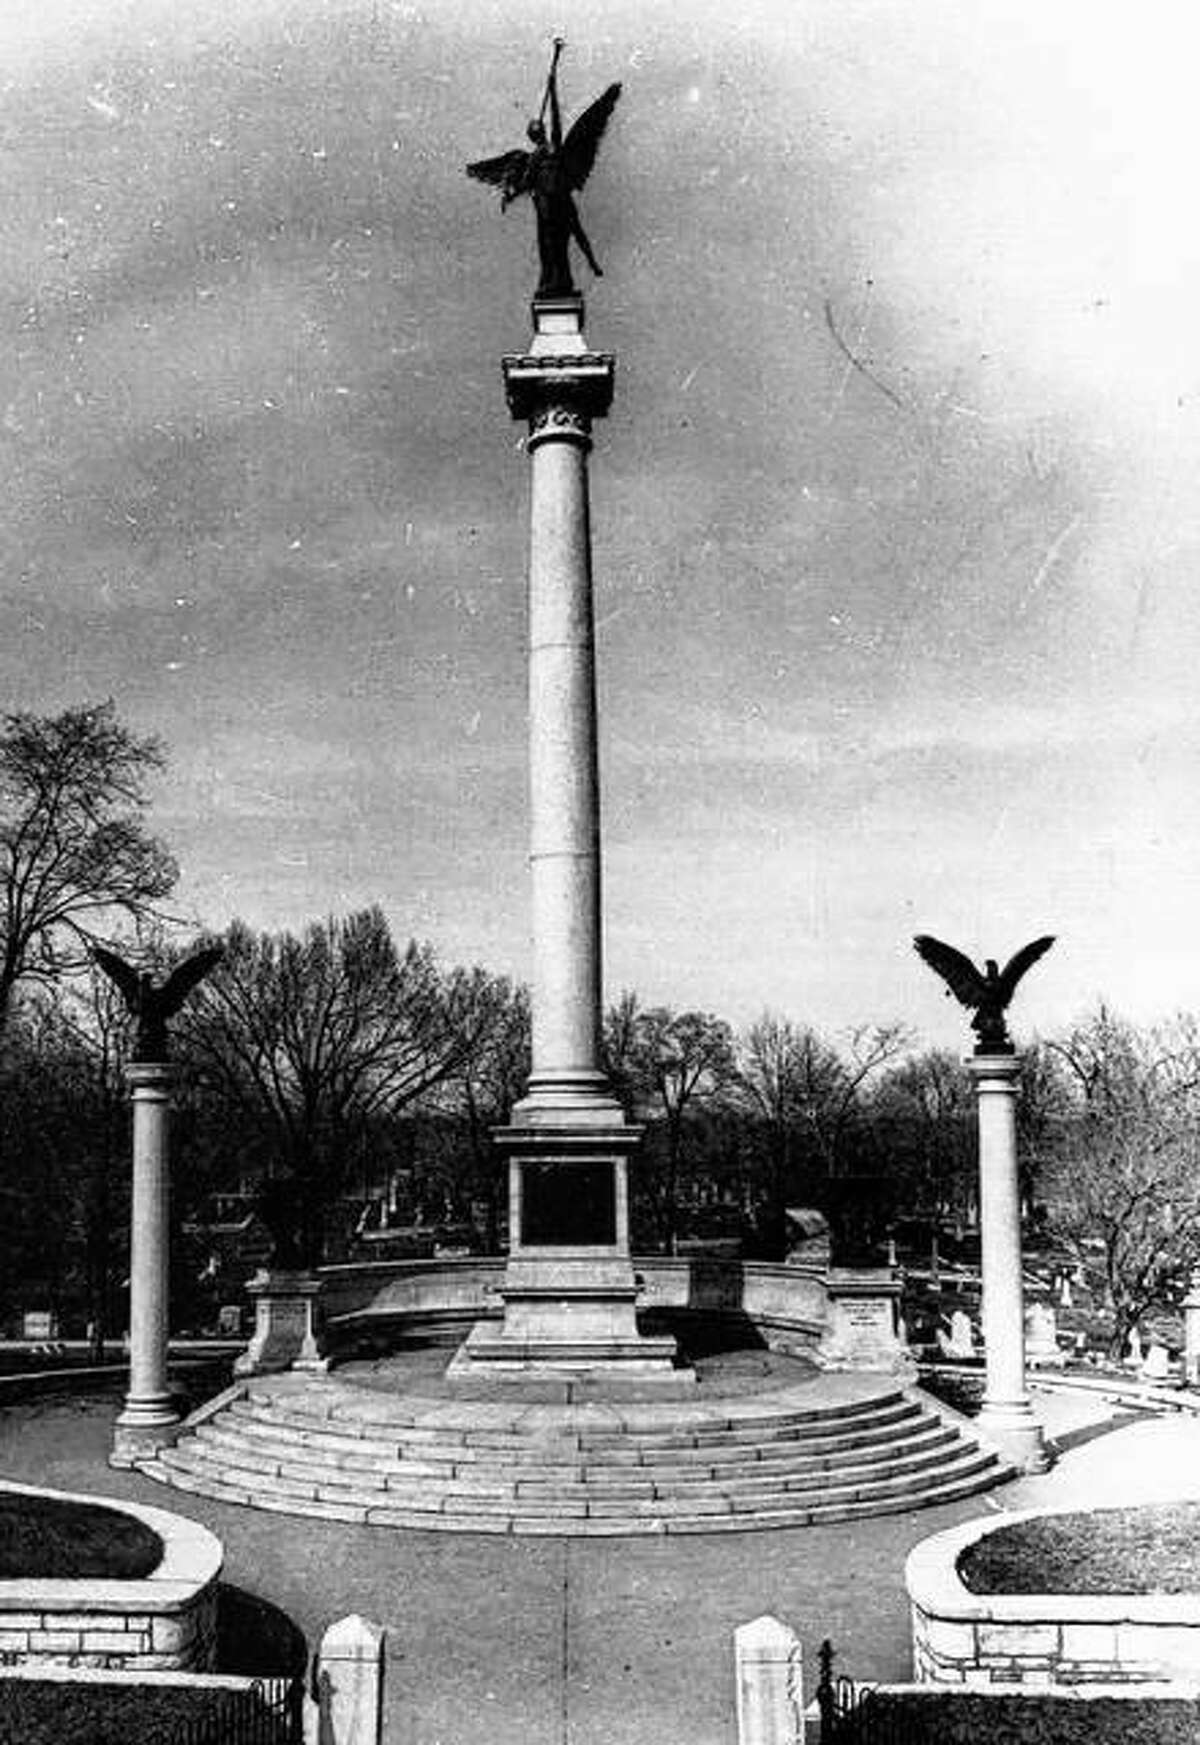 The Lovejoy Monument soars high over the hills and streets of Alton. Located in Alton City Cemetery, the monument consists of a massive column of Barre granite 93 feet in height. The column is surmounted by a seventeen foot high bronze statue depicting Victory. The base of the column is surrounded by a terrace, granite steps and walkways. Bronze plates on the memorial commemorate Lovejoy as A Martyr to Liberty; Champion of Free Speech; Minister of the Gospel.